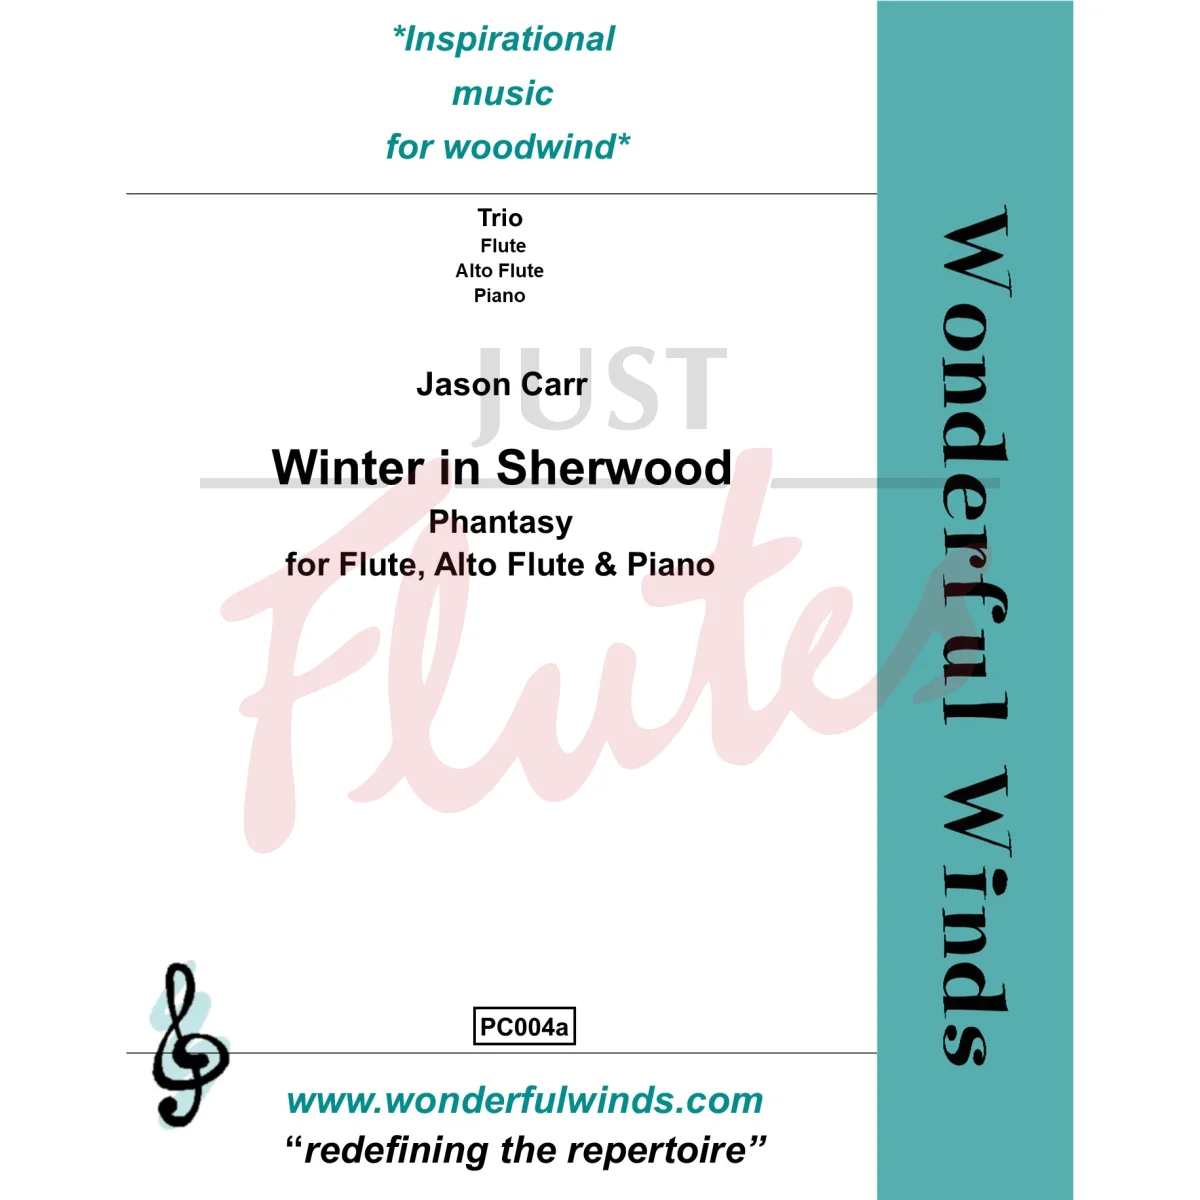 Winter in Sherwood: Phantasy for Flute, Alto Flute and Piano